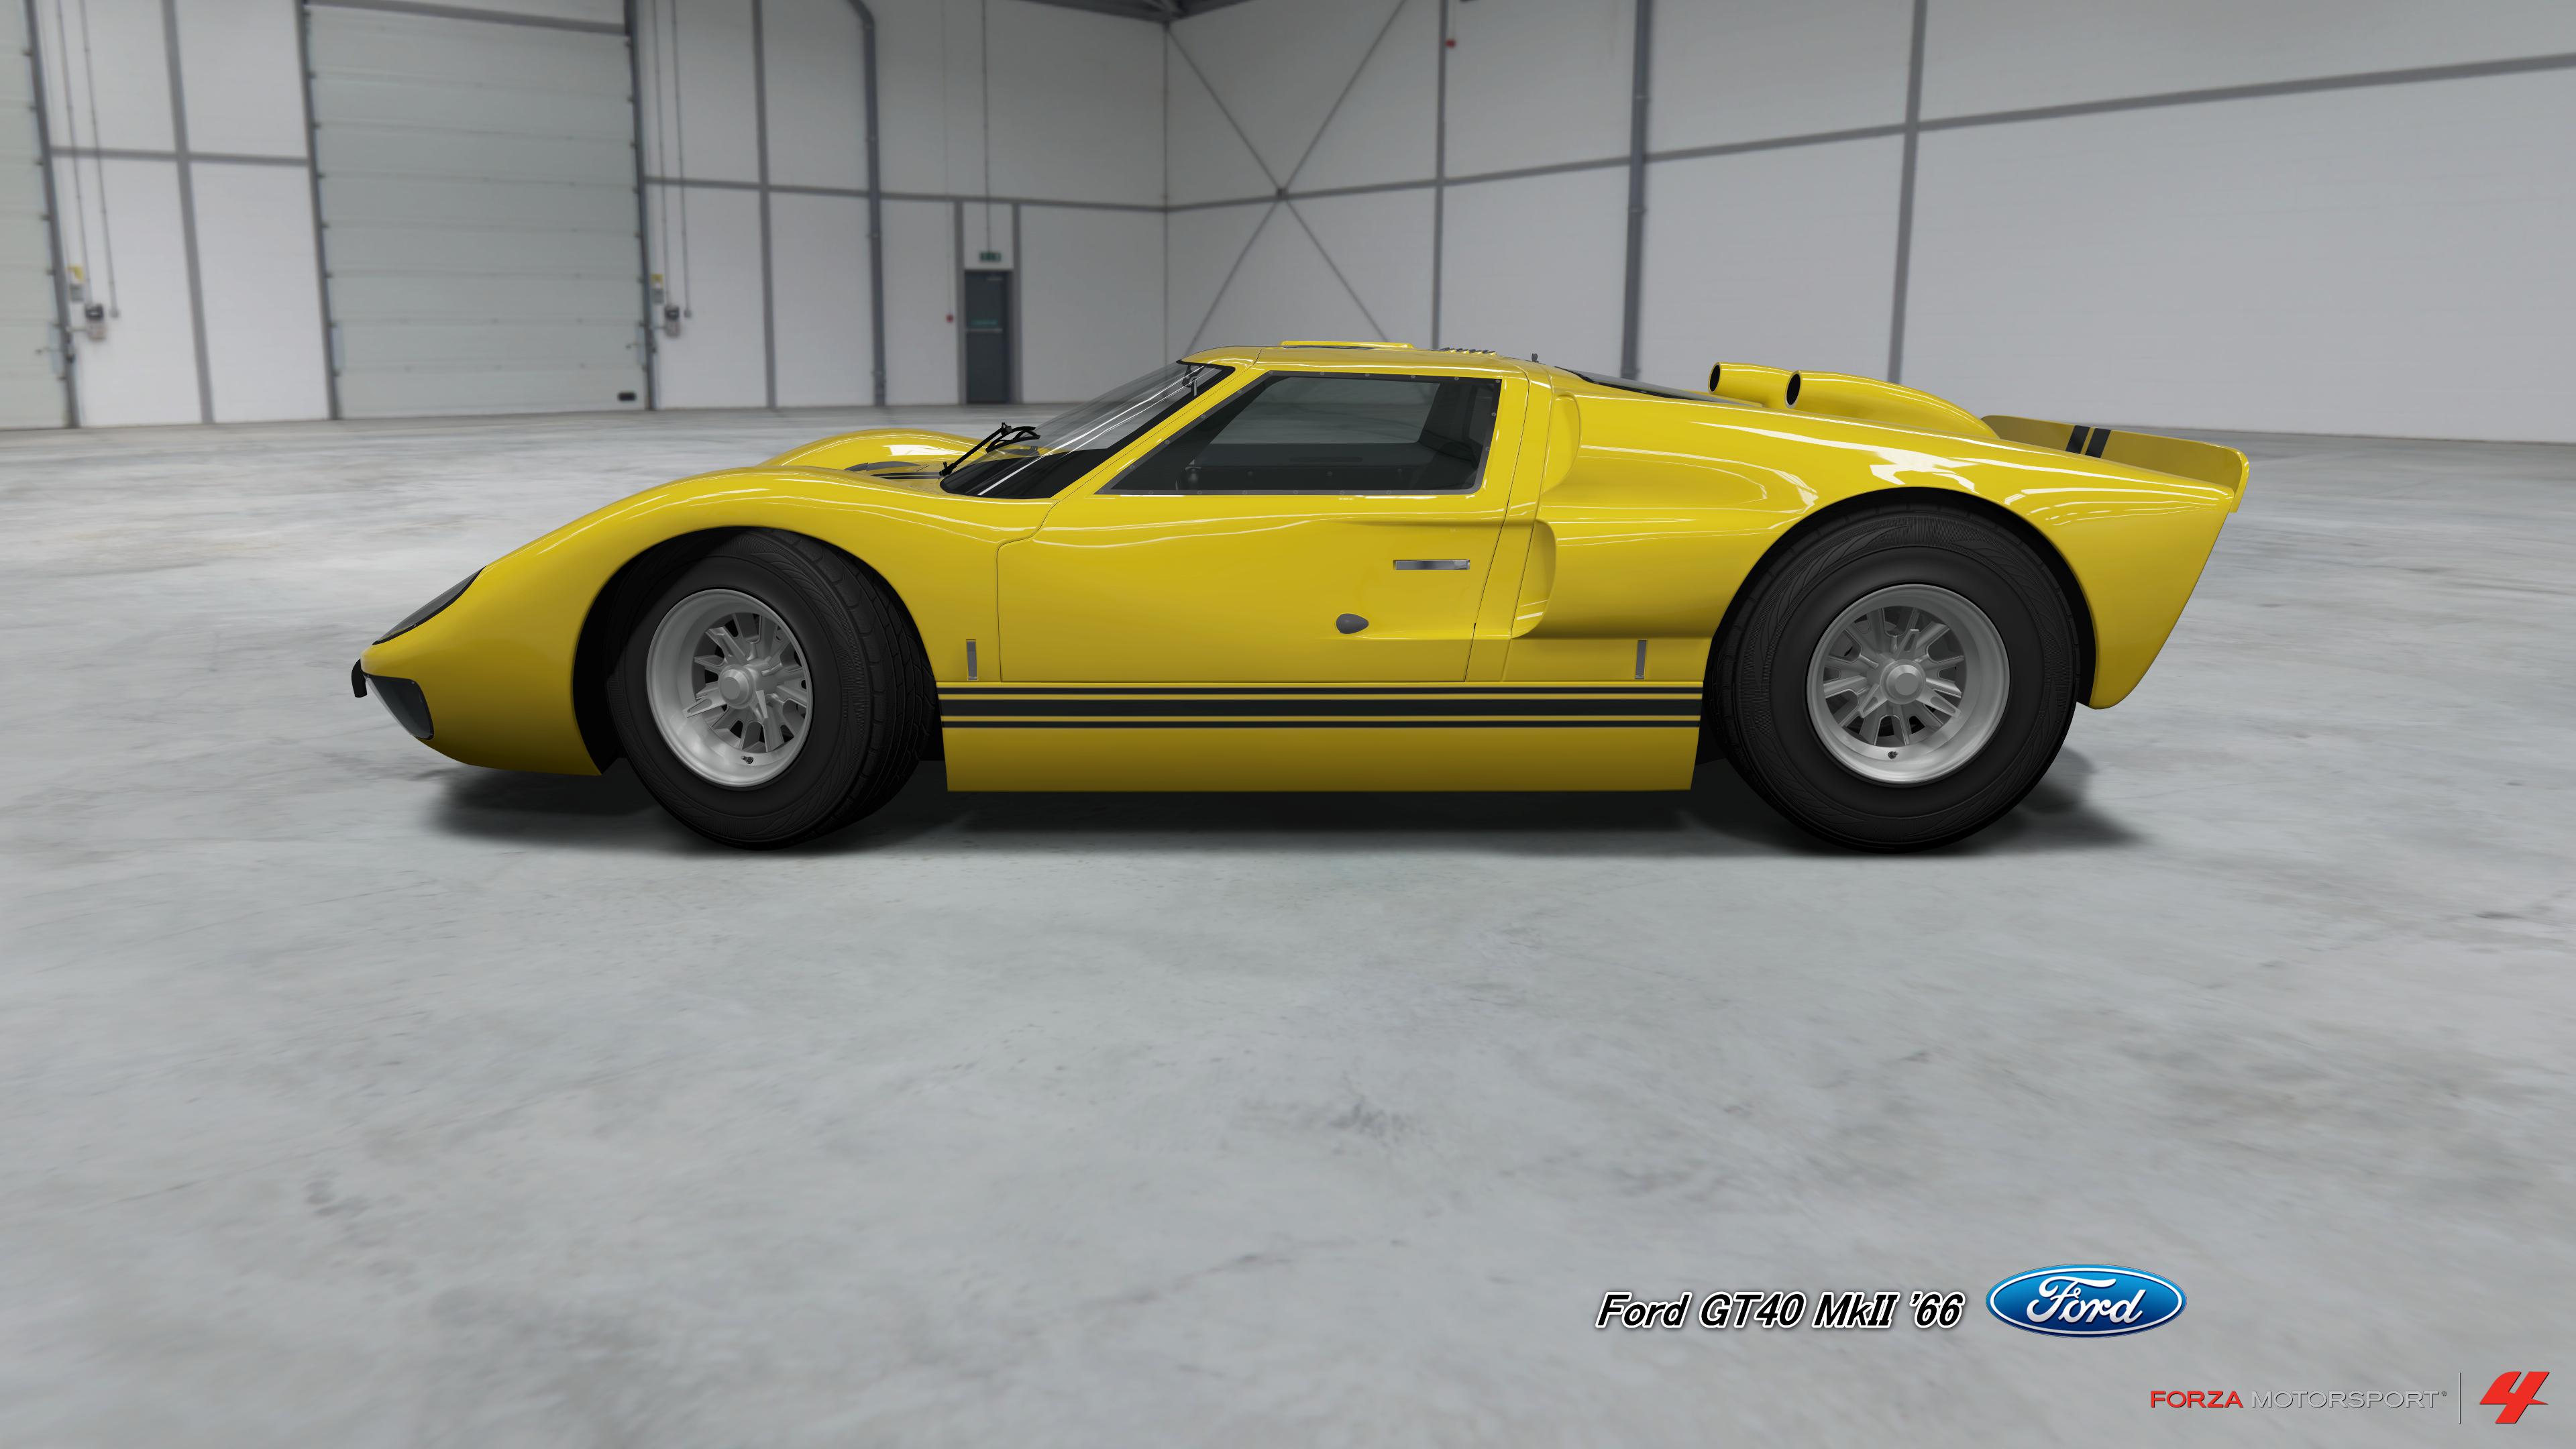 Ford Gt40 Mkii High Quality And Resolution Wallpaper